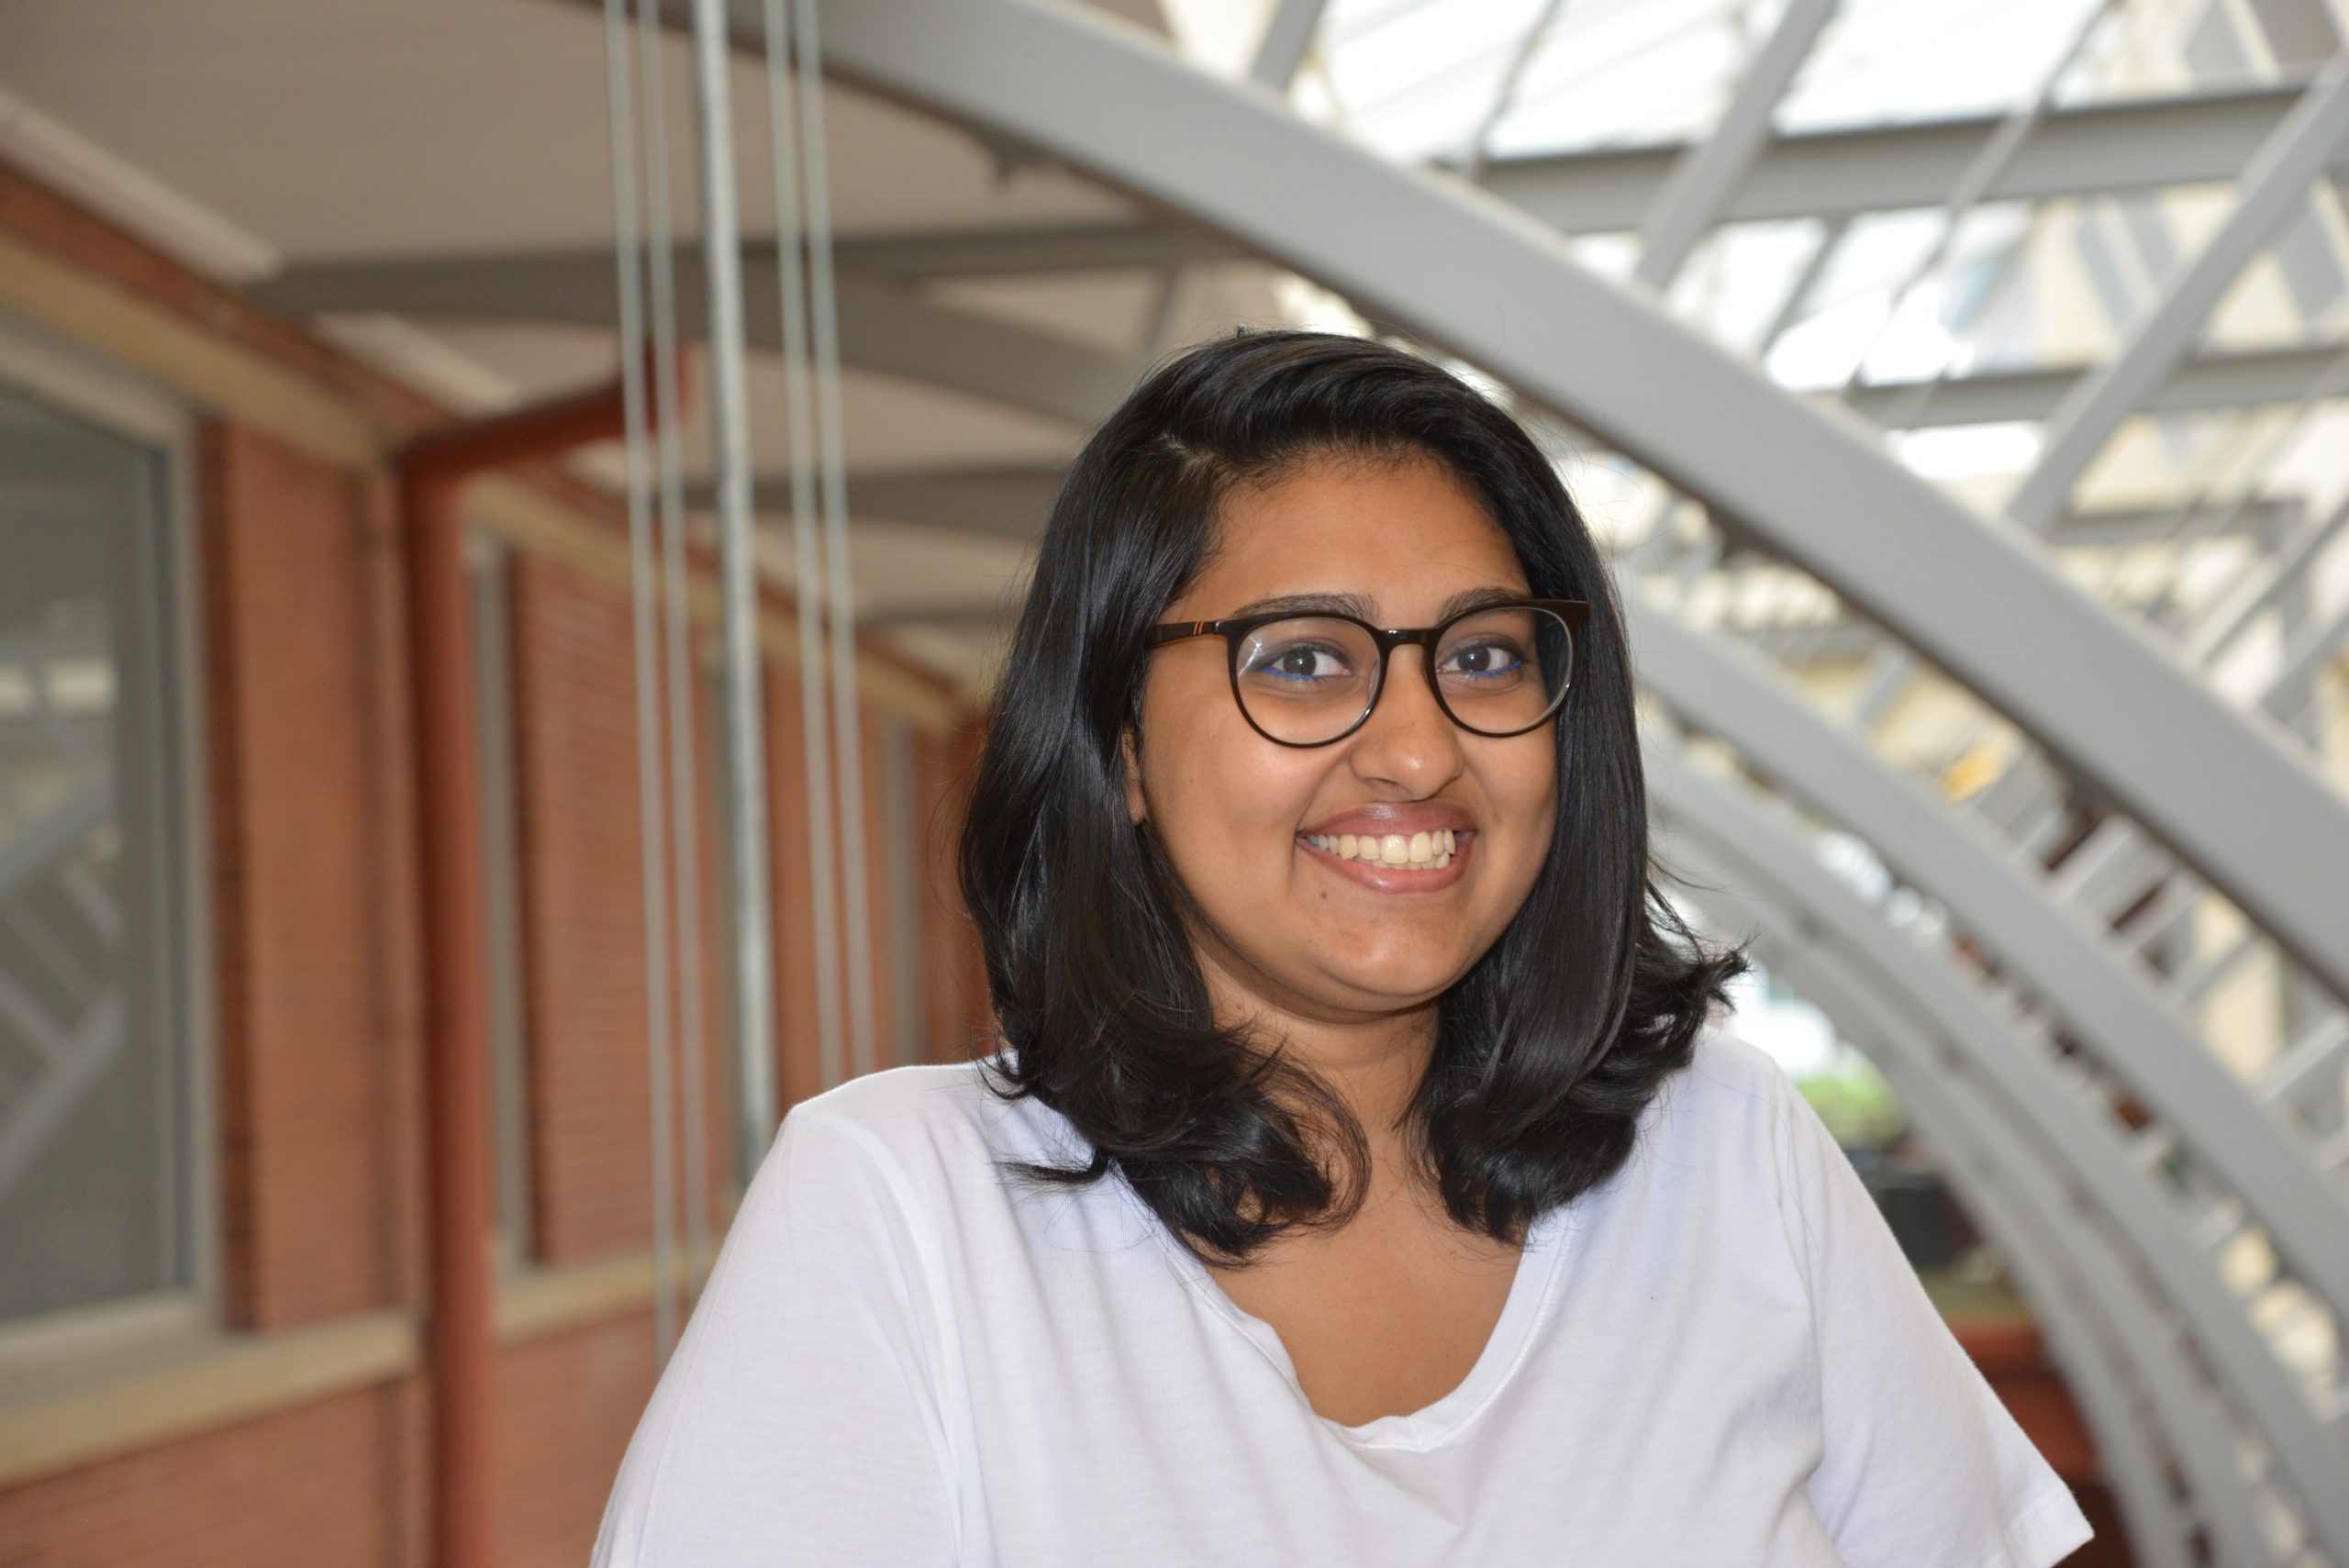 Vaishnavi Sivaprasad (a South Asian woman from India with dark brown shoulder-length hair and glasses) wearing a white t shirt, smiling into the camera